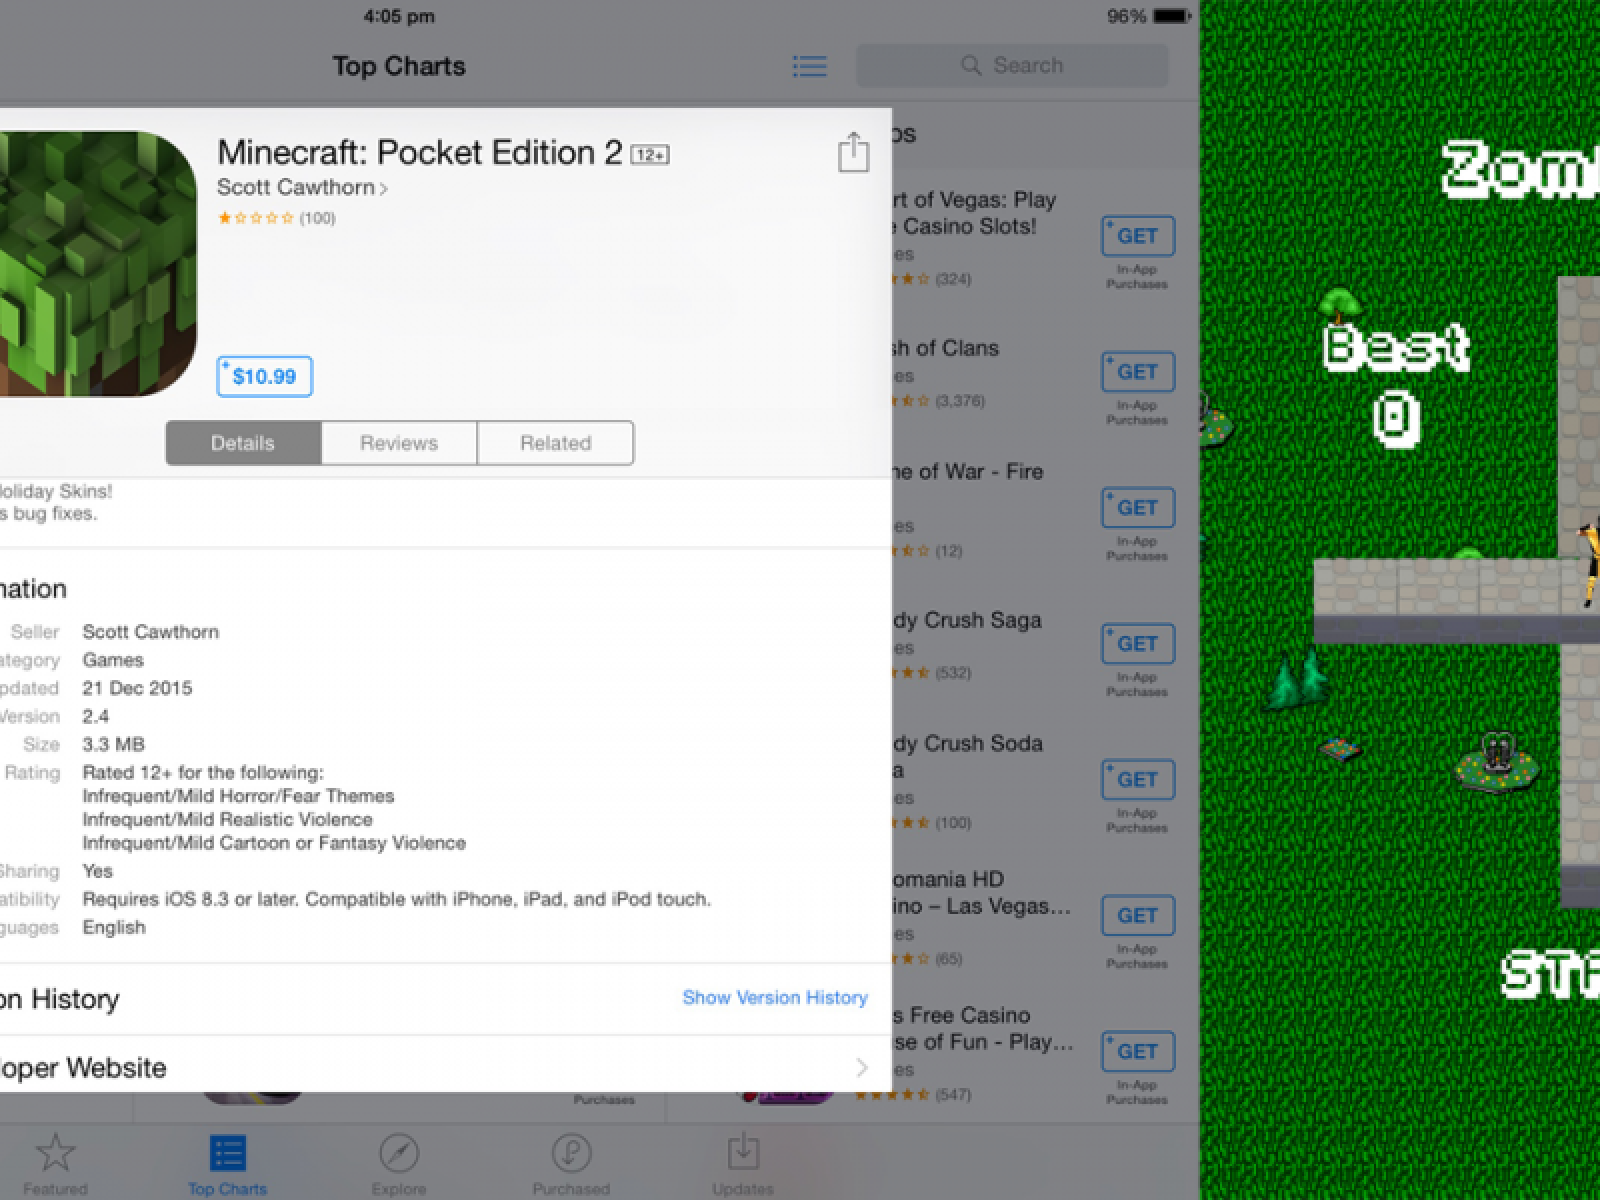 Minecraft: Pocket Edition 2 is unofficial, not developed by Mojang